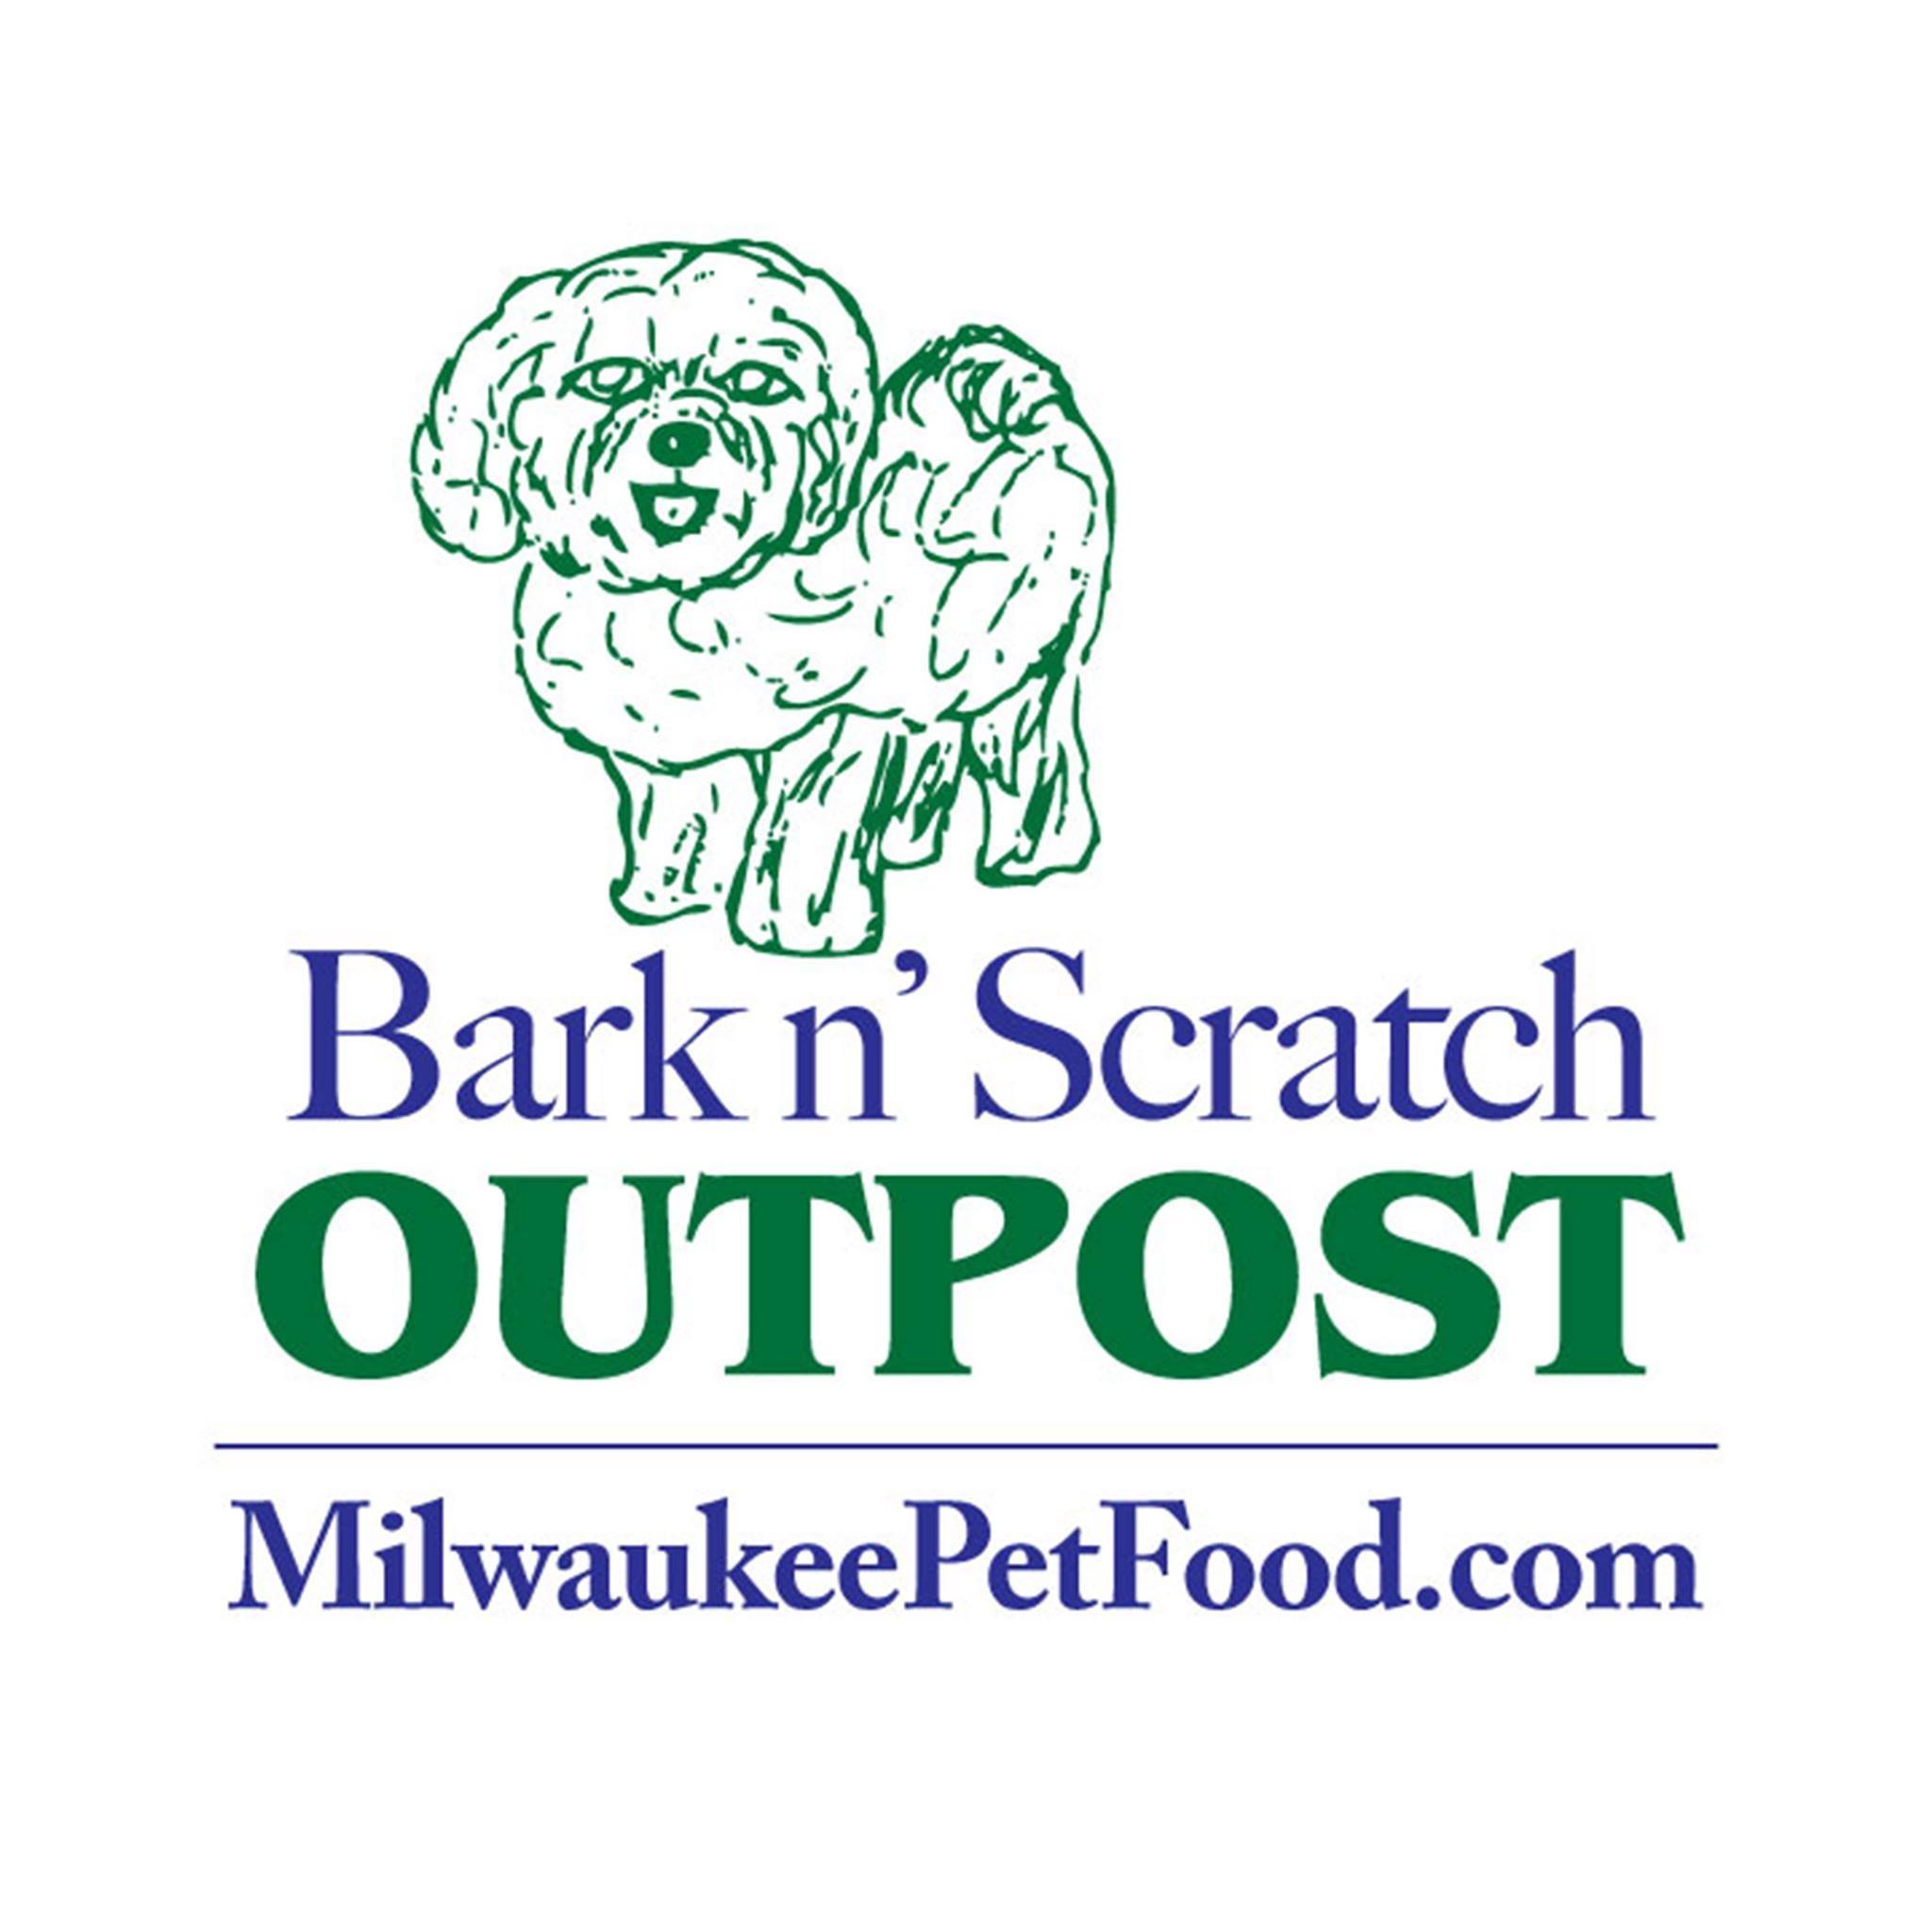 Company logo of Bark N Scratch Outpost